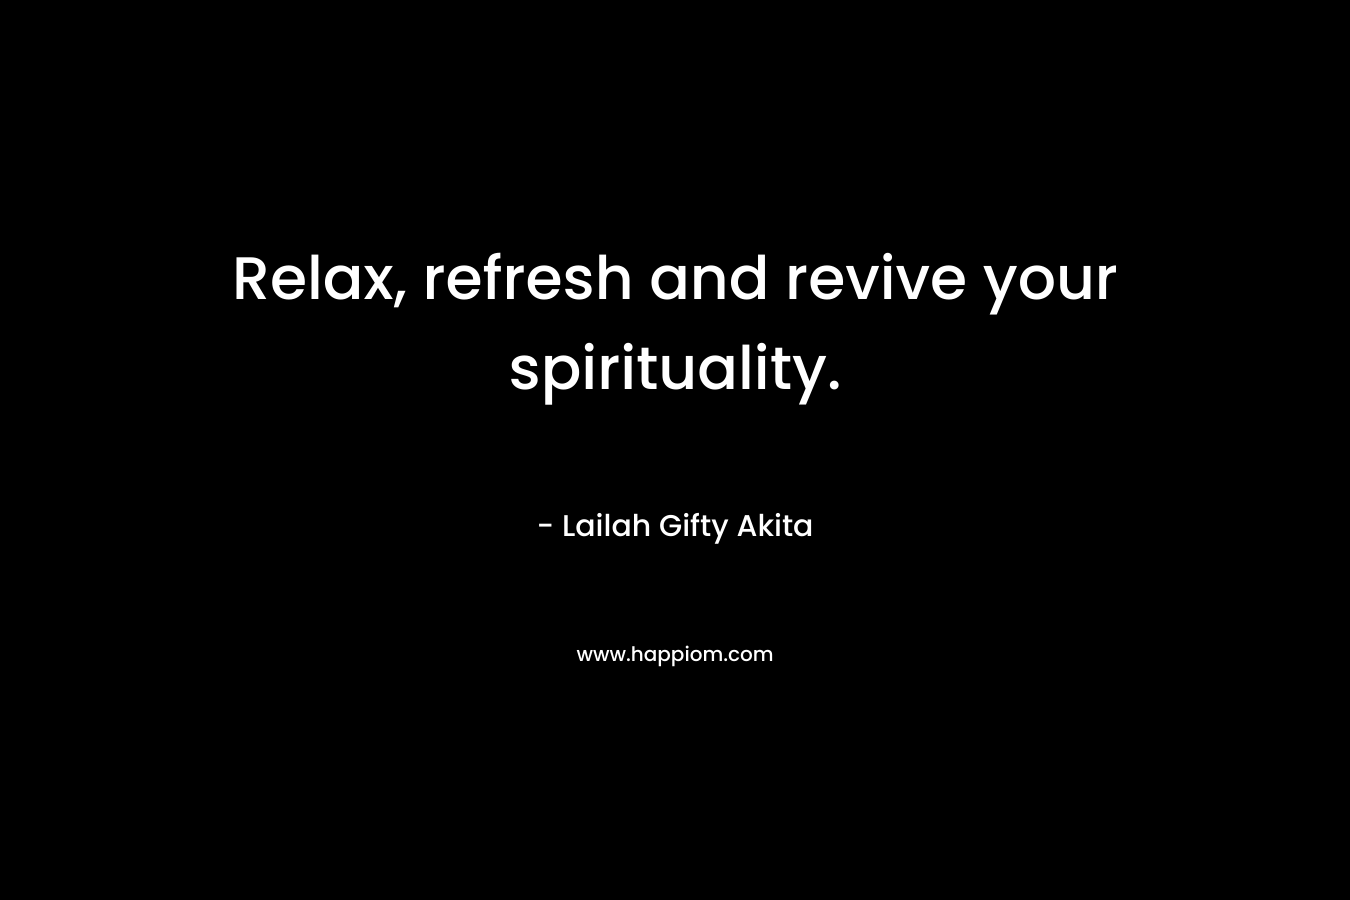 Relax, refresh and revive your spirituality. – Lailah Gifty Akita